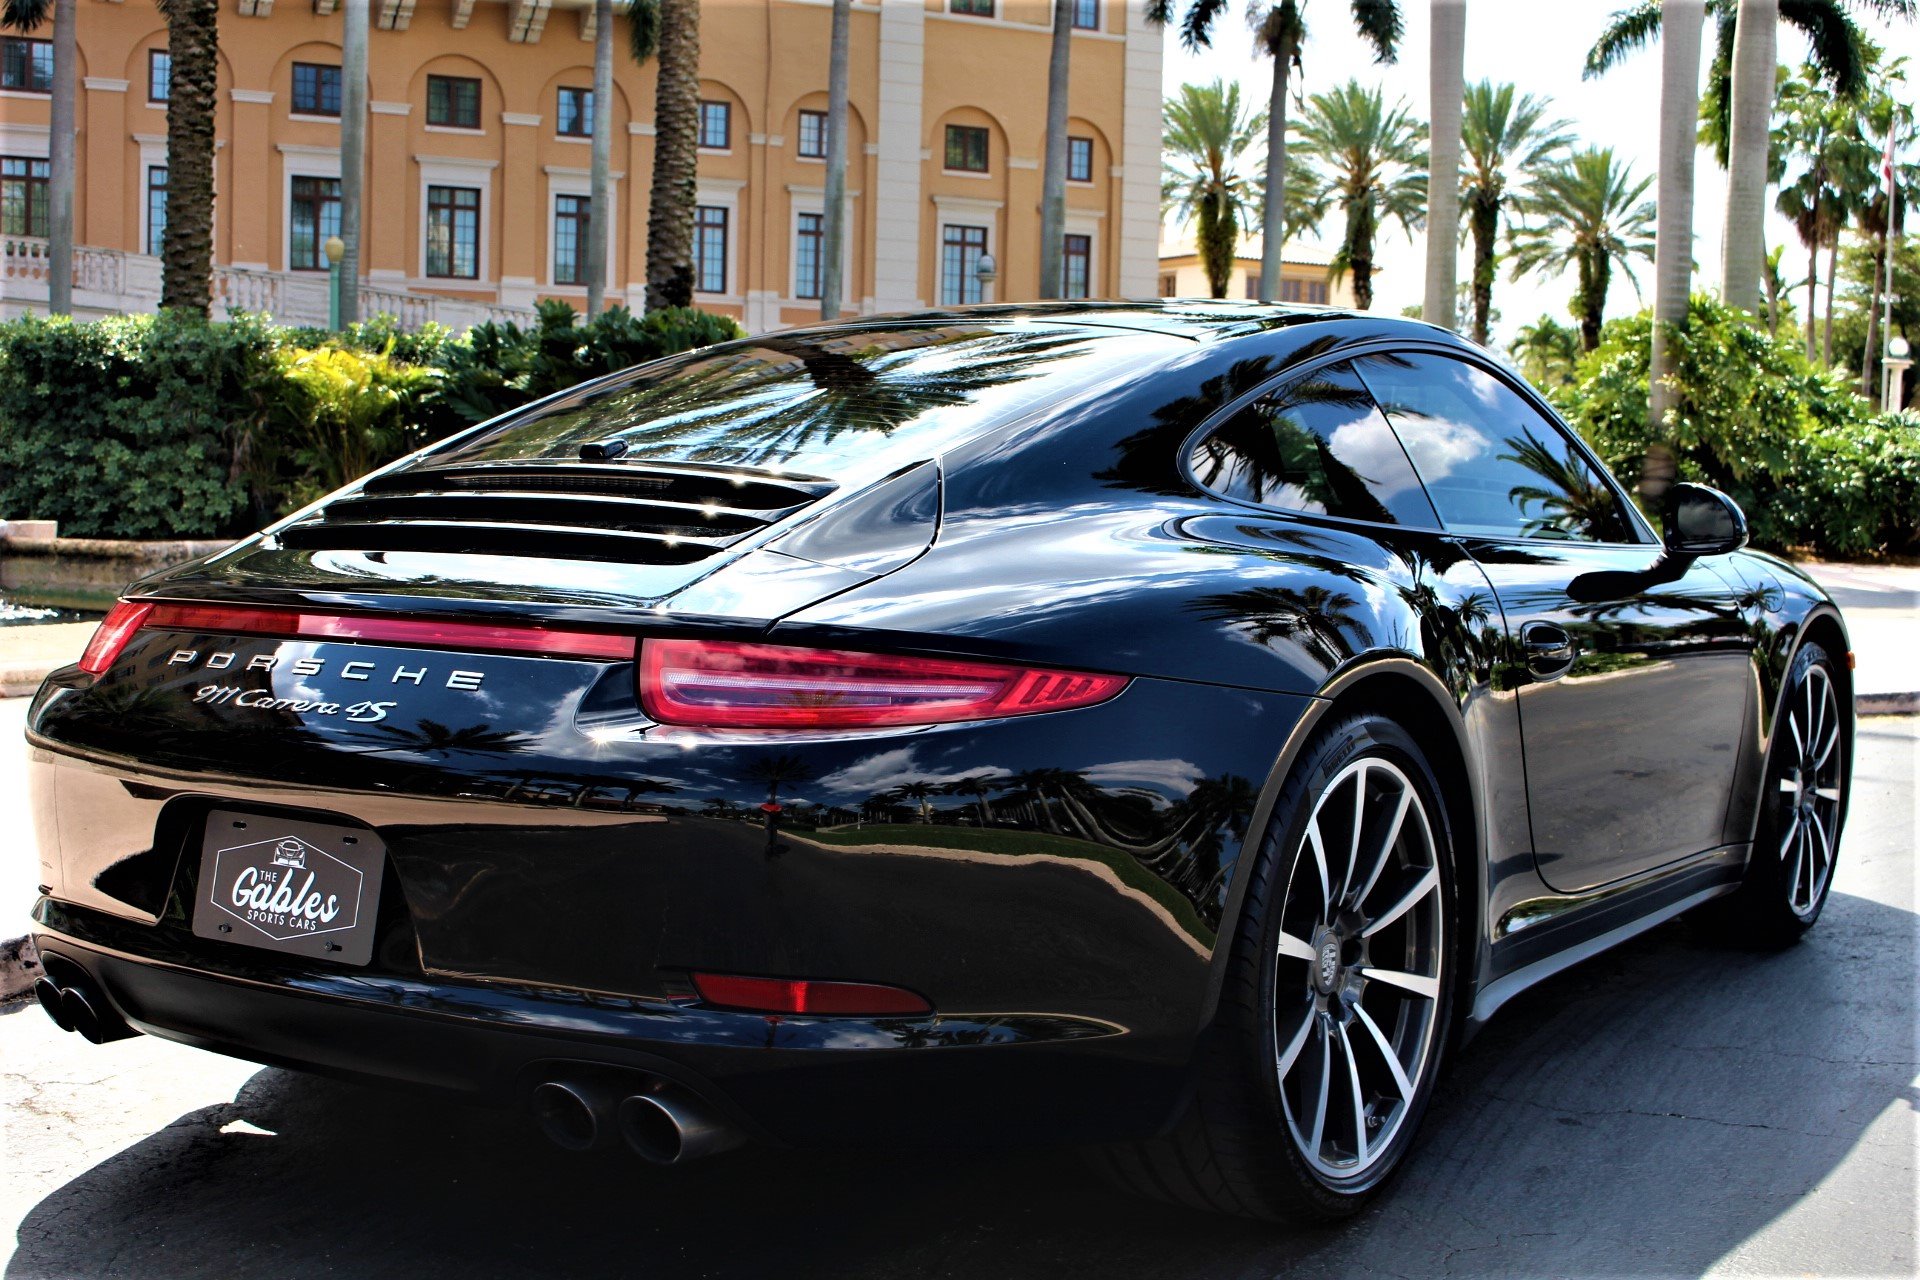 Used 2013 Porsche 911 Carrera 4S for sale Sold at The Gables Sports Cars in Miami FL 33146 1